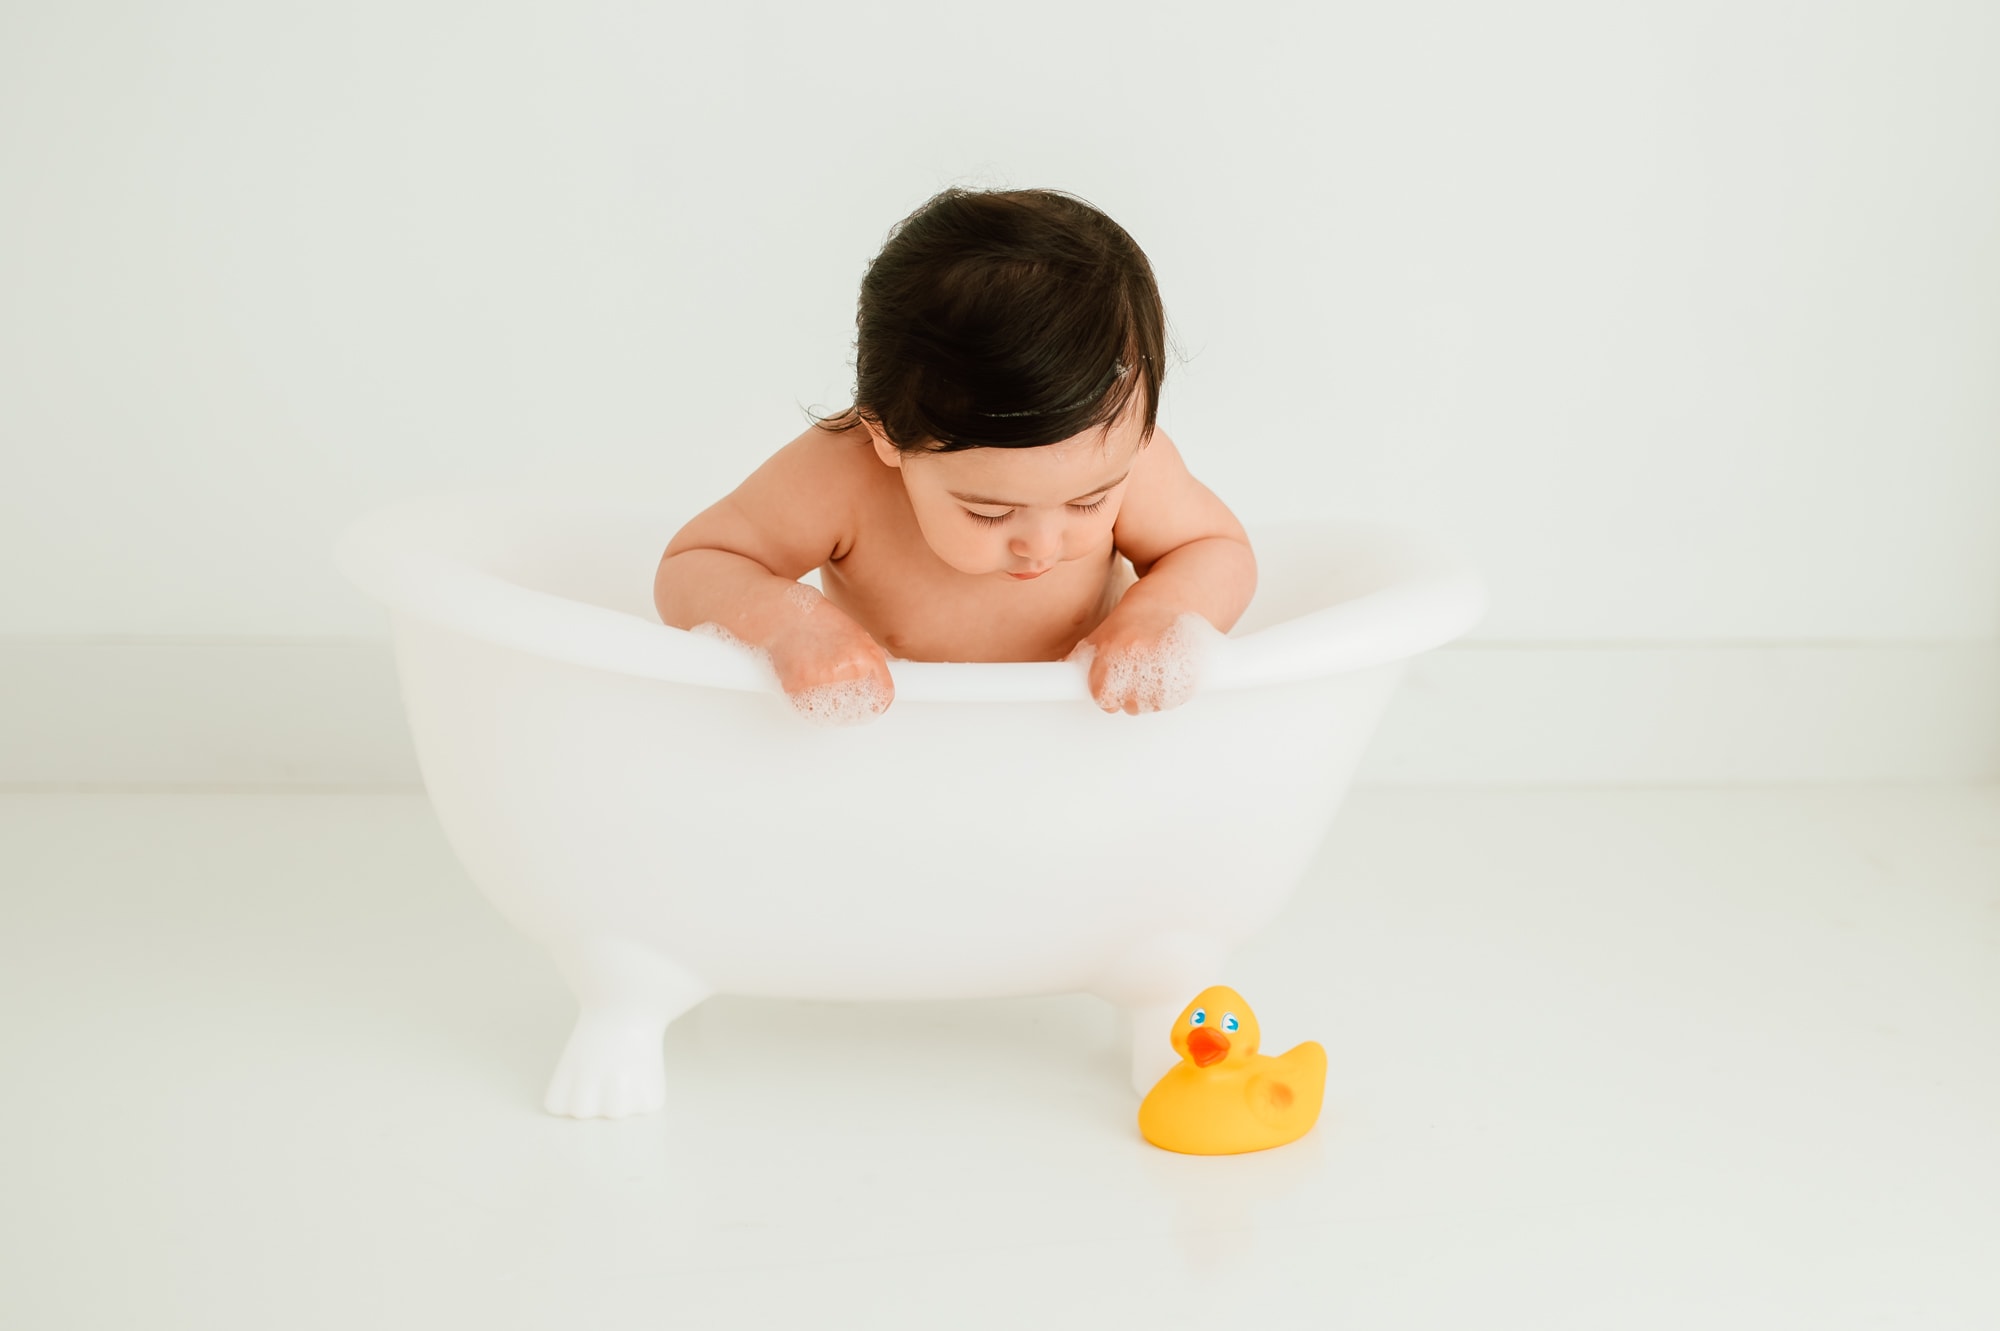 Baby taking a bath in a Denny's bathtub prop after cake smash and looking down at yellow rubber duck on the ground.